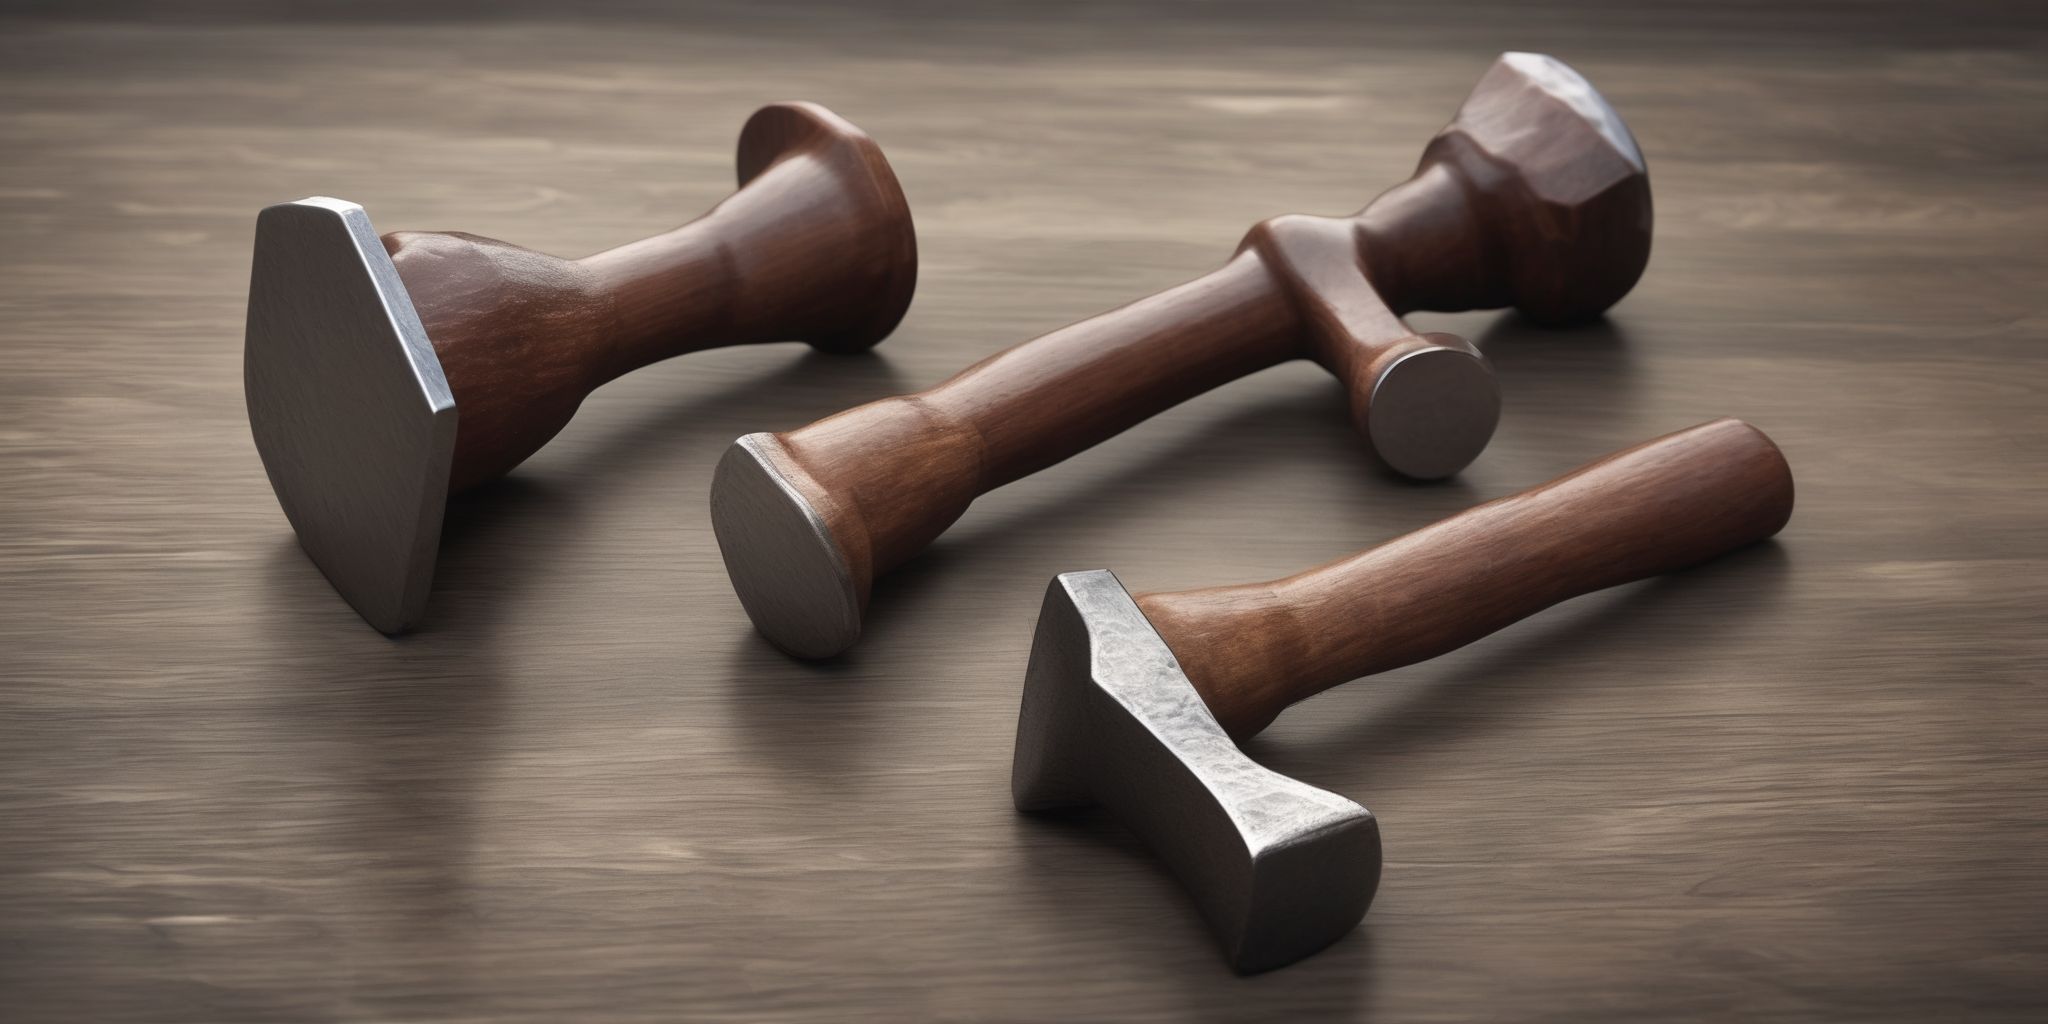 Hammer  in realistic, photographic style